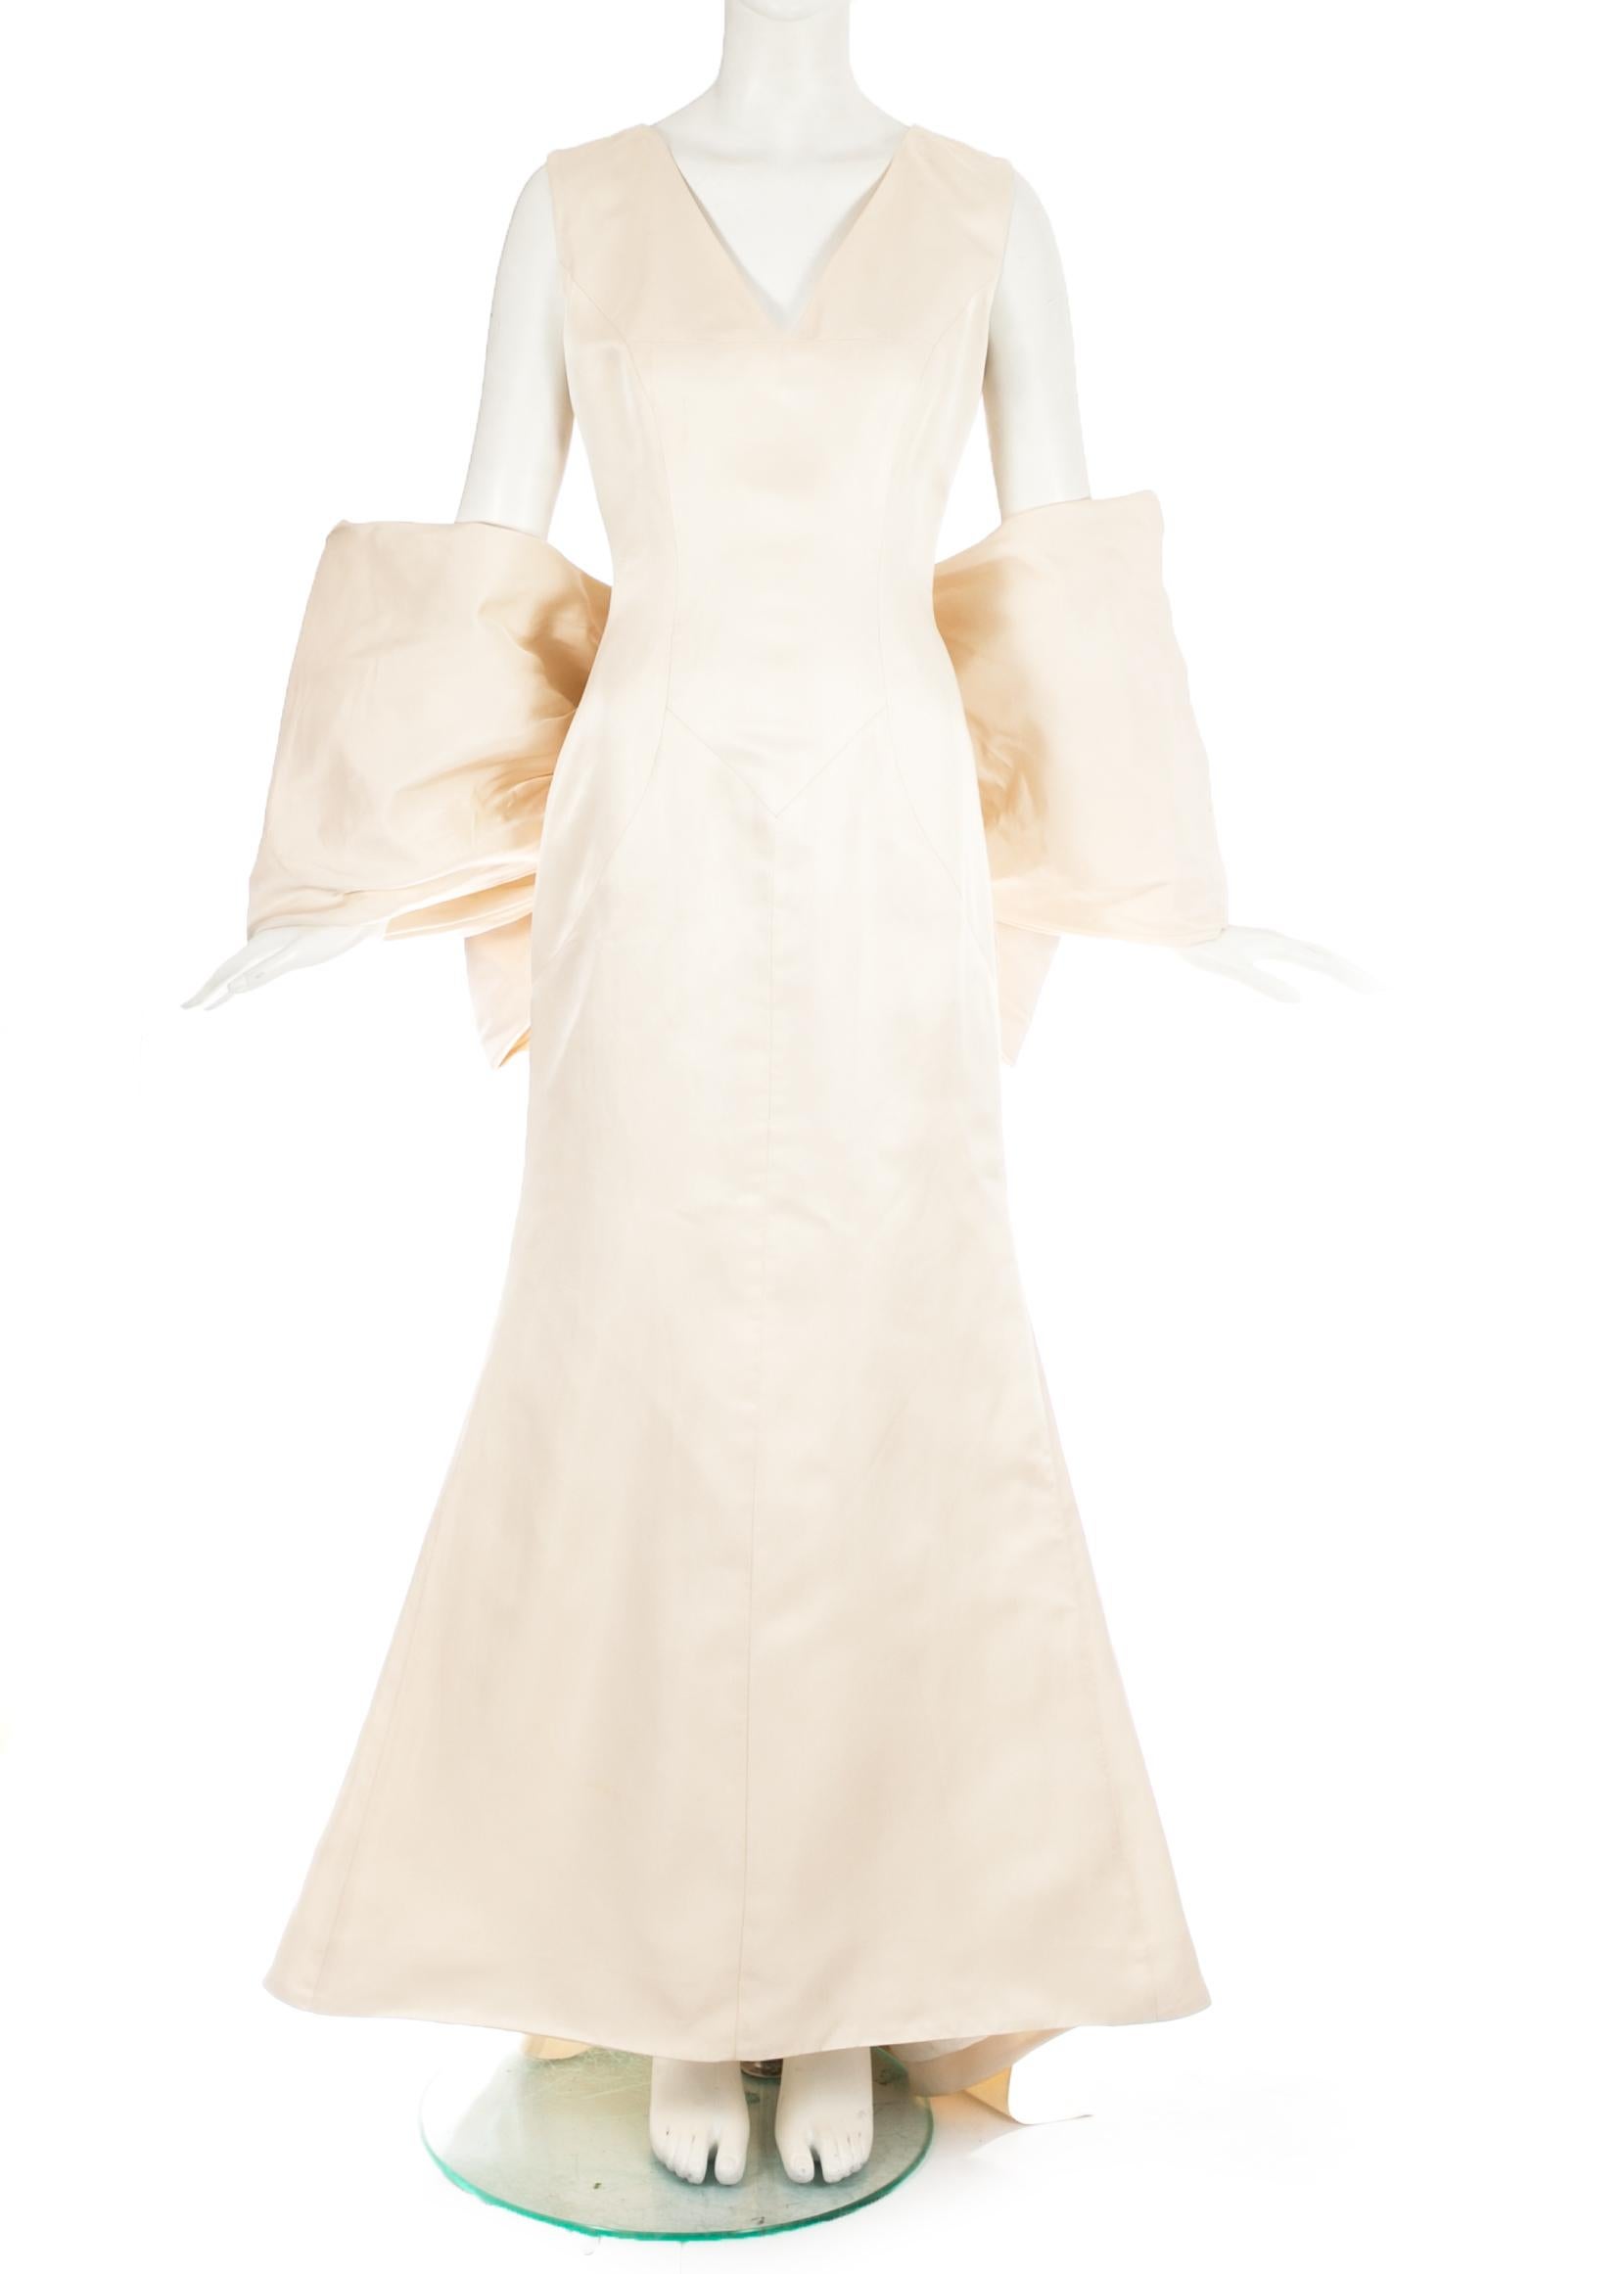 Dolce & Gabbana ivory silk fishtail wedding dress with large bow, c. 1990s For Sale 1